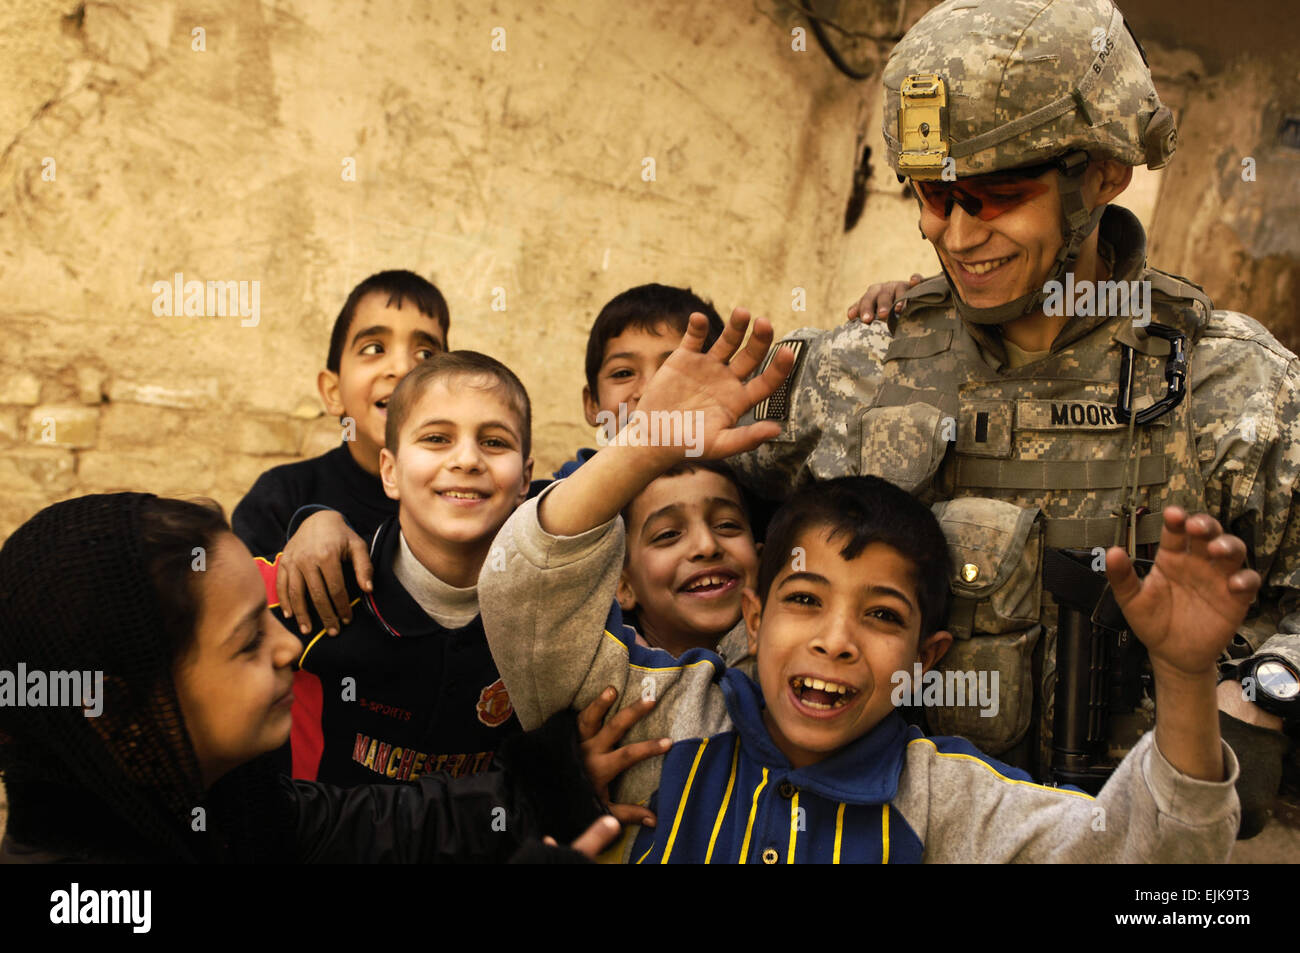 U.S. Army 1st Lt. Michael Moore is surrounded by Iraqi children during a patrol the Rusafa neighborhood of Baghdad, Iraq, on Feb. 17, 2008.  Moore is a platoon leader with 3rd Platoon, Charlie Company, 1st Battalion, 504th Parachute Infantry Regiment.  Staff Sgt. Jason T. Bailey, U.S. Air Force.  Released Stock Photo